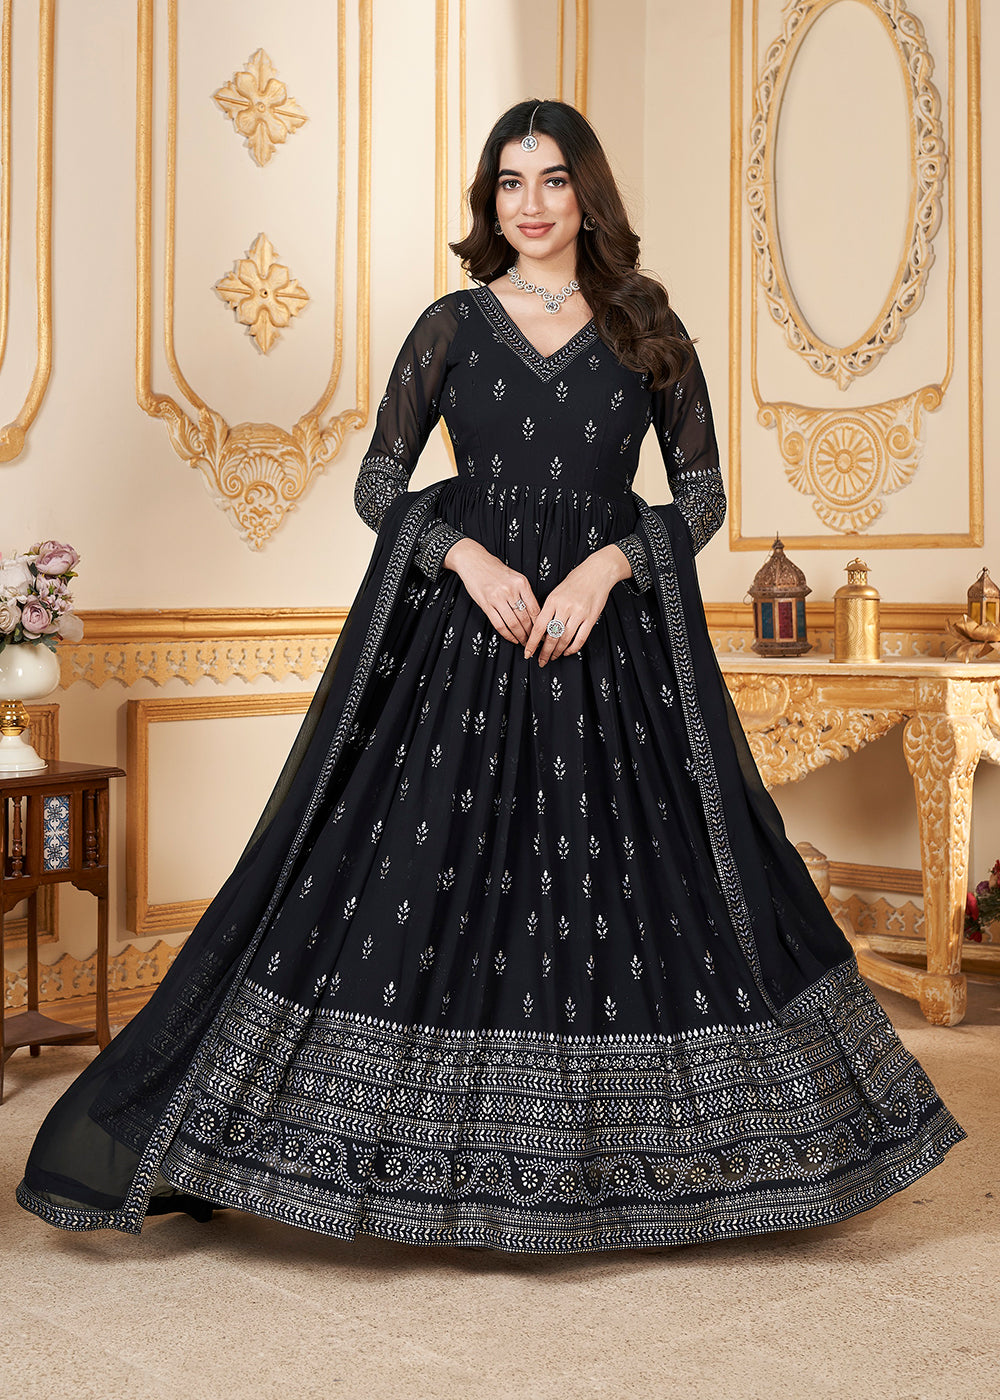 Buy Now Navy Blue Metalic Foil Work Embroidered Wedding Festive Anarkali Gown Online in USA, UK, Australia, Canada & Worldwide at Empress Clothing.